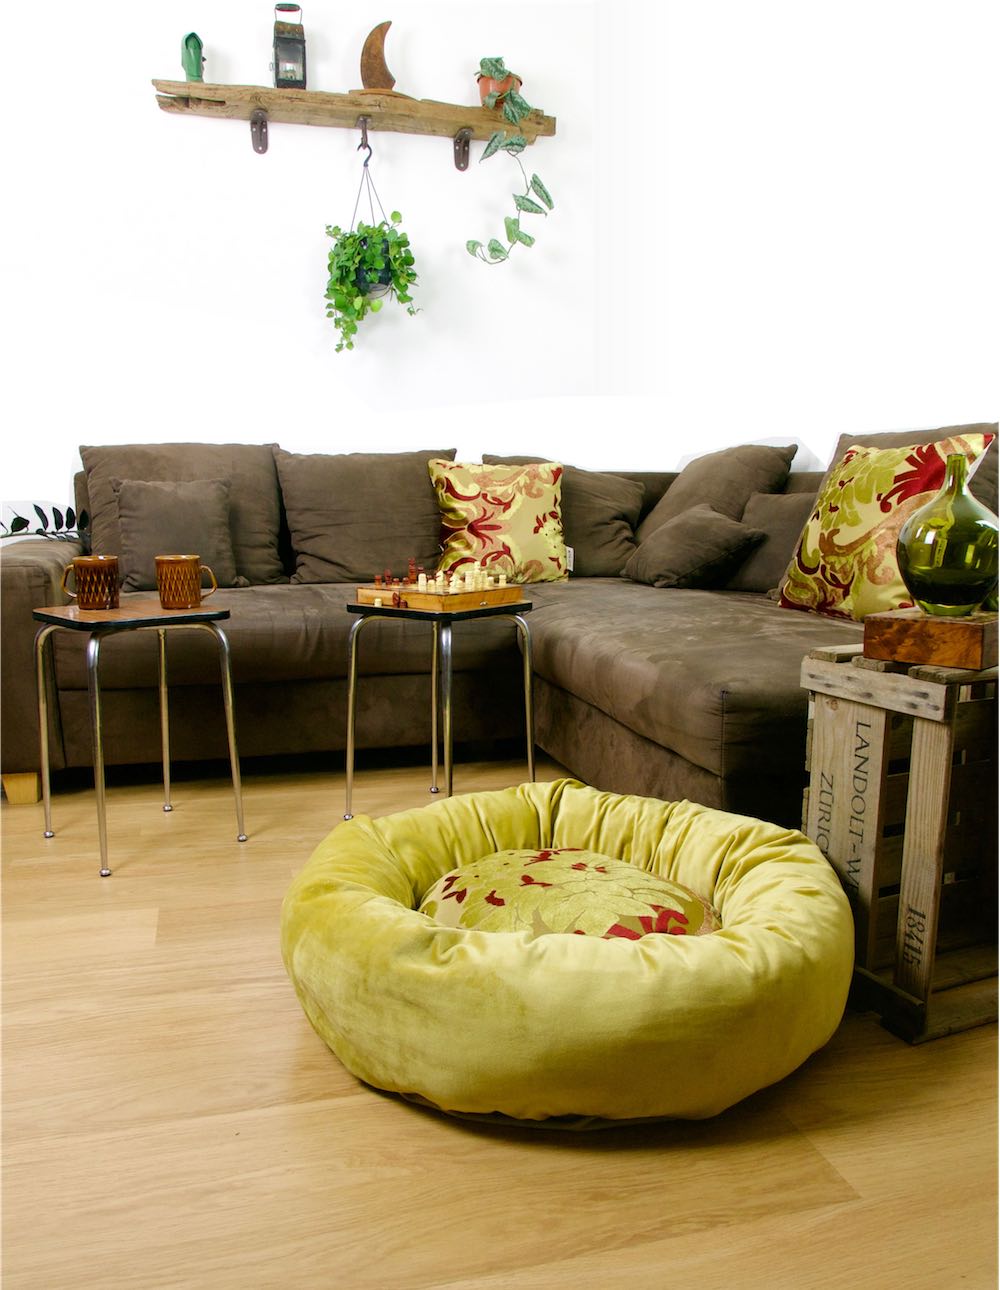 Red golden donut pet bed in an stylish living room. Two decorative pillows on the couch are made from the same material as the pet bed.